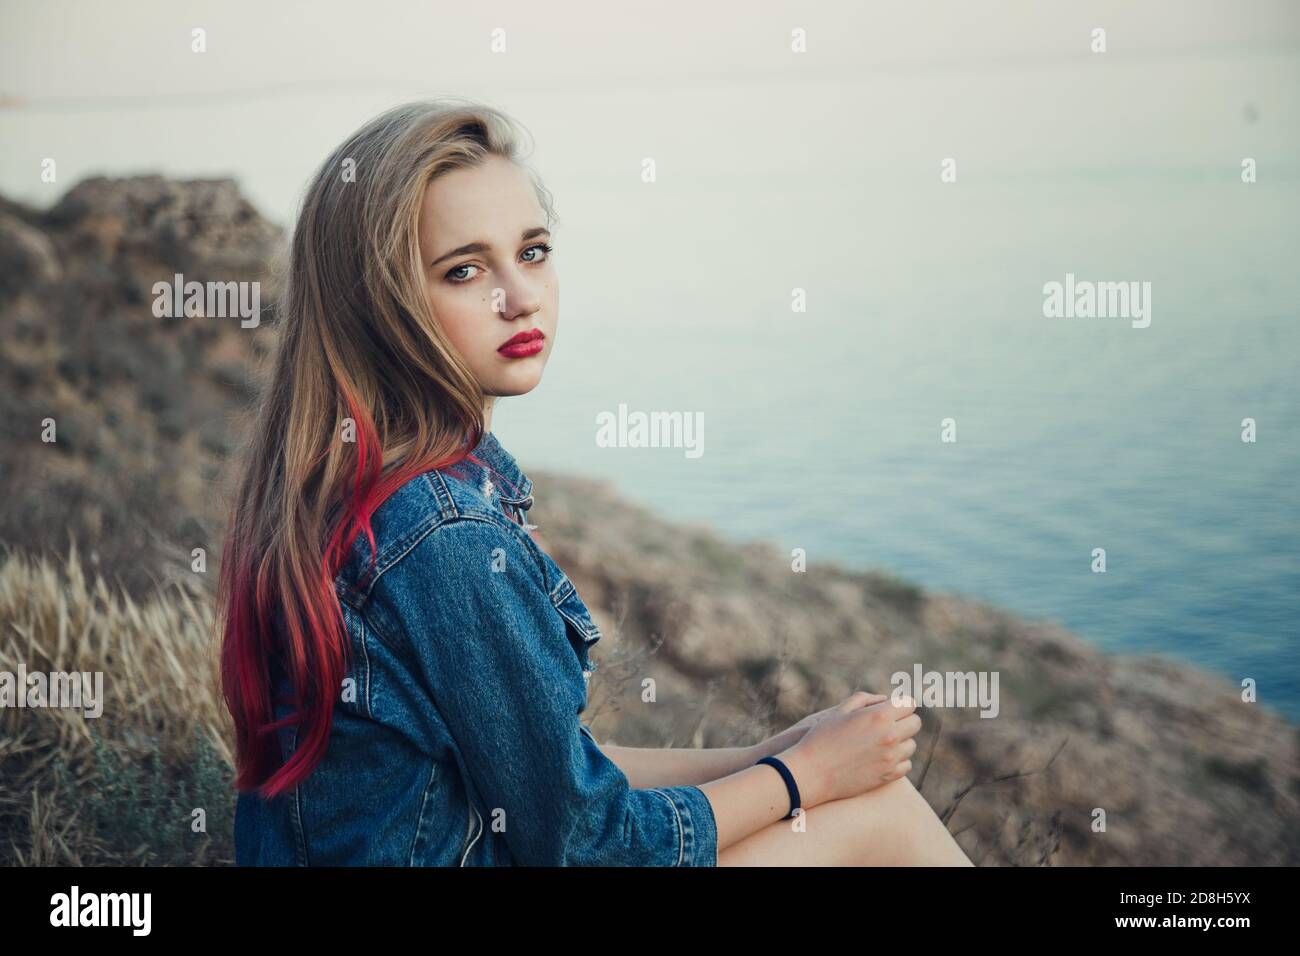 Young blonde girl with bright features smiling on the background of the sea and mountains in a denim skirt and jacket. Background blurred for artistic Stock Photo